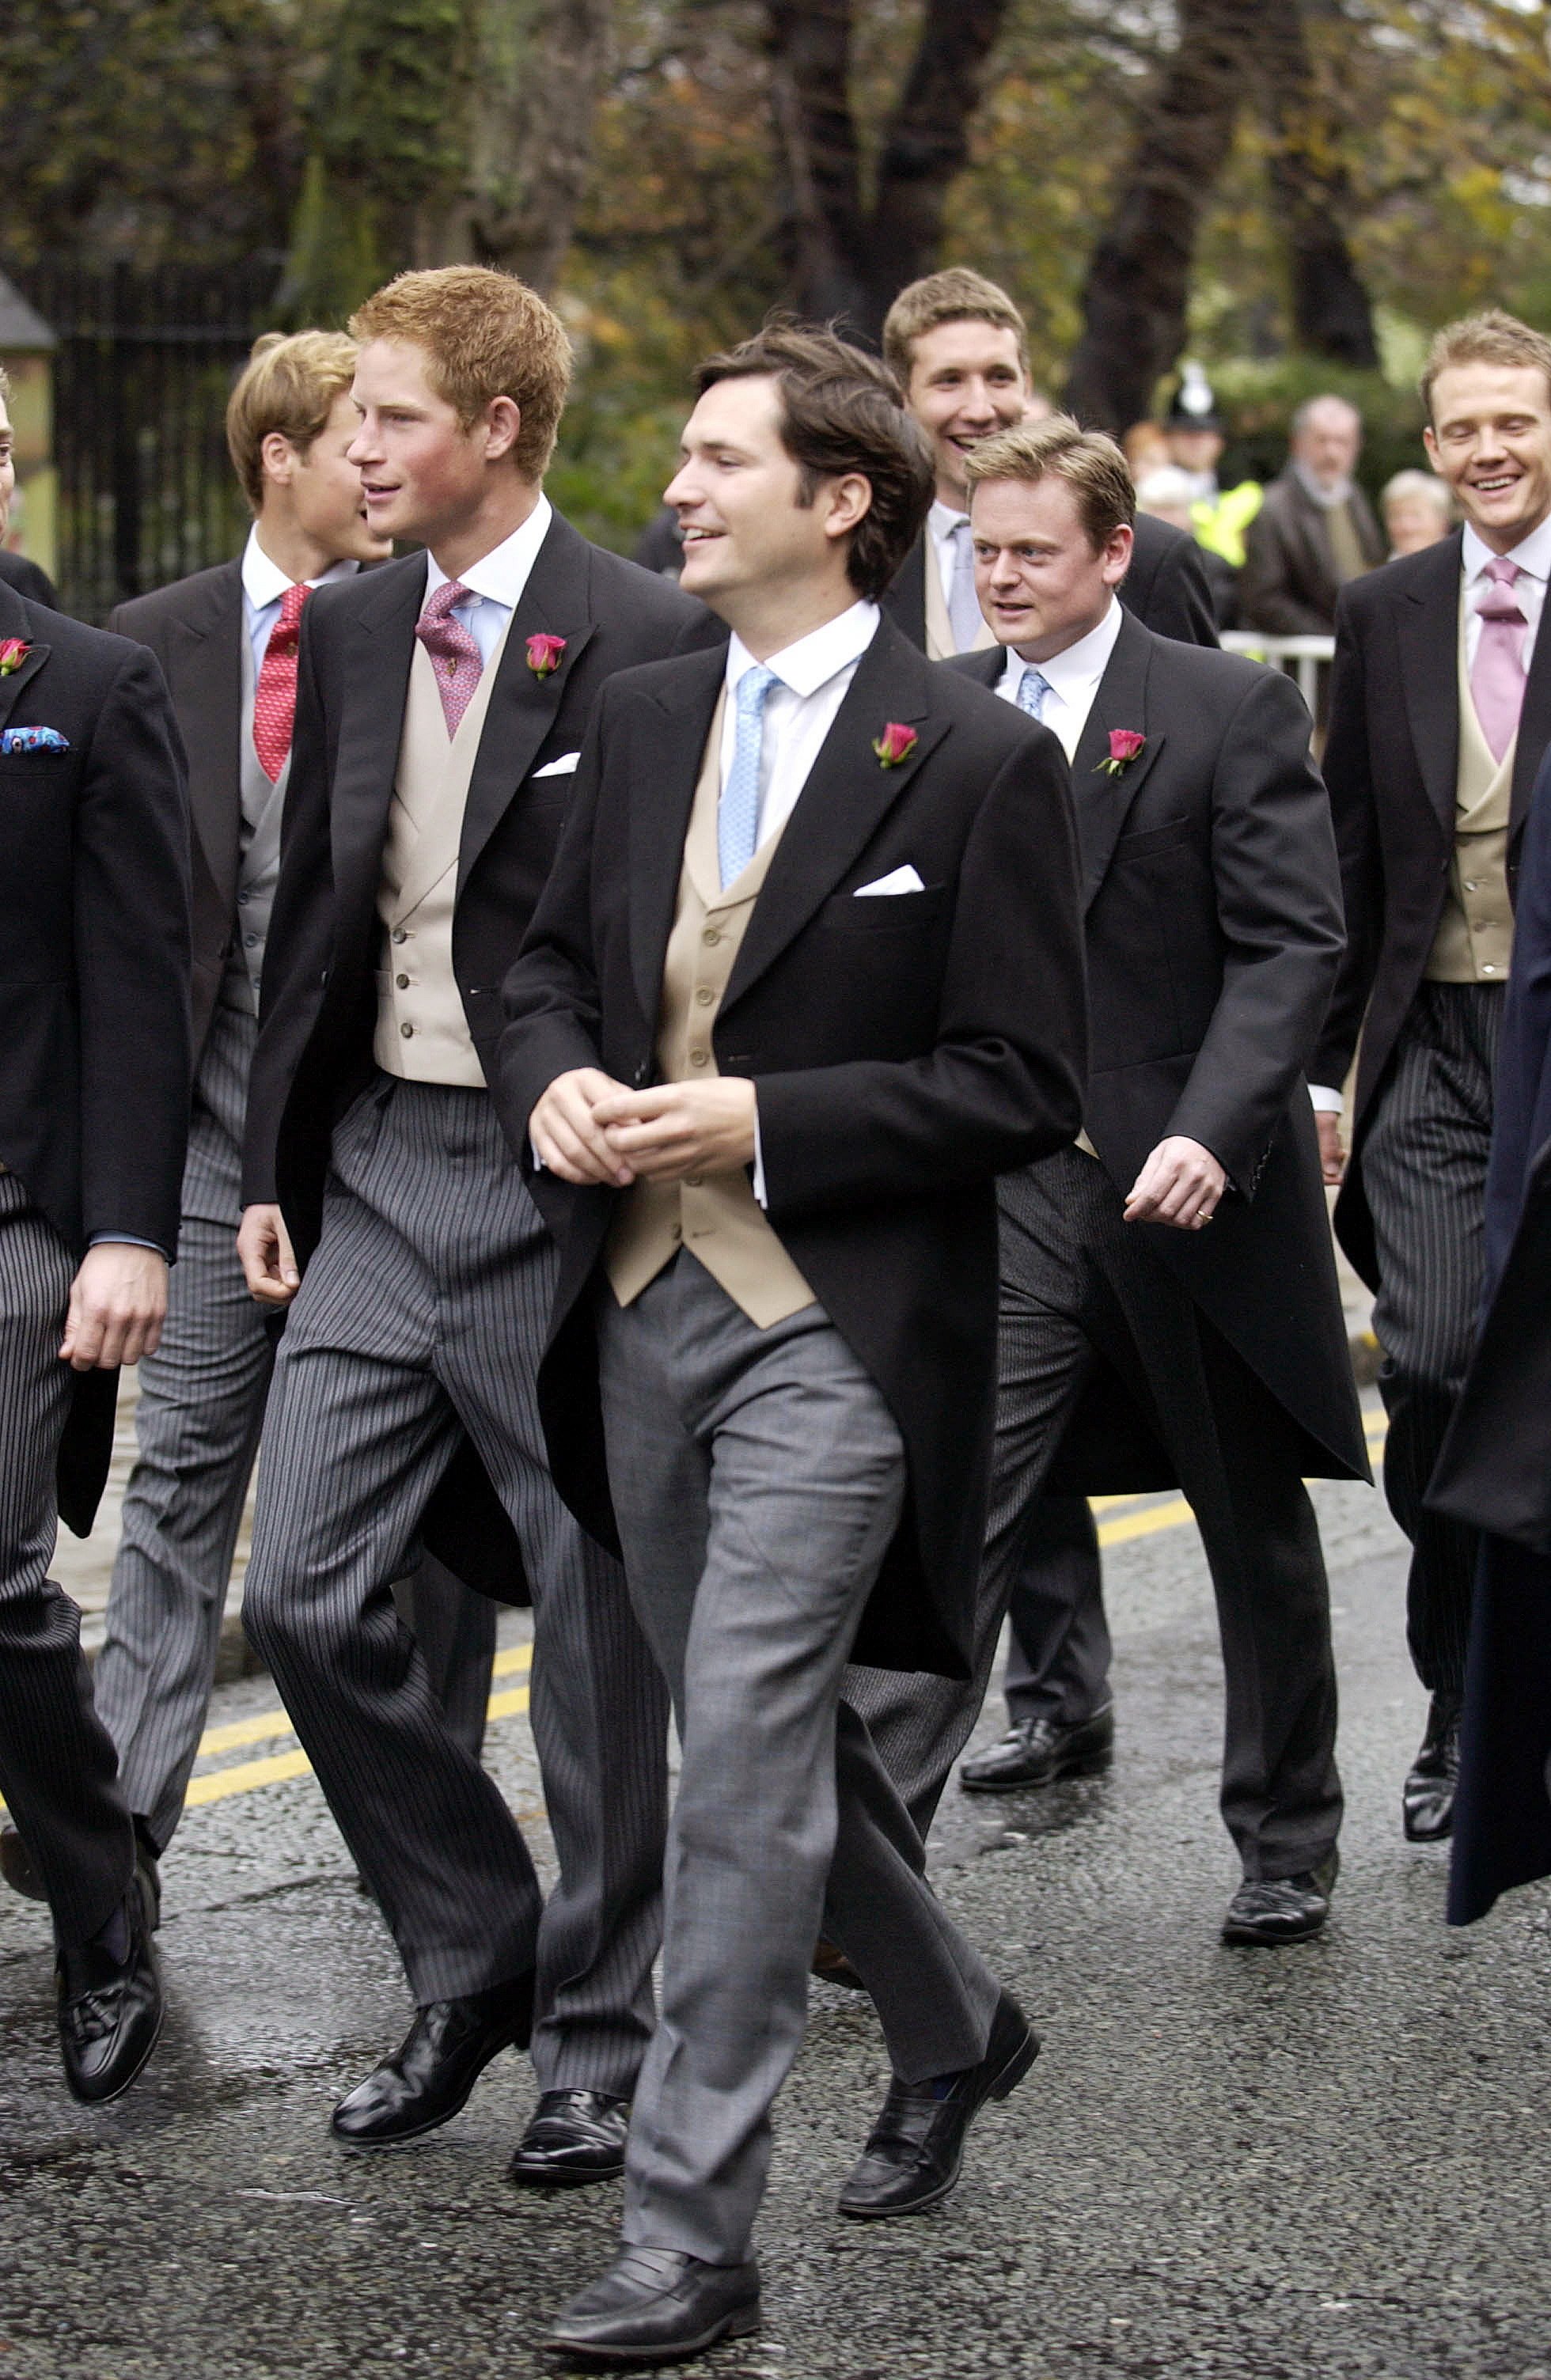 Prince Harry joining other ushers on their way to their friends' wedding at Chester Cathedral. | Source: Getty Images